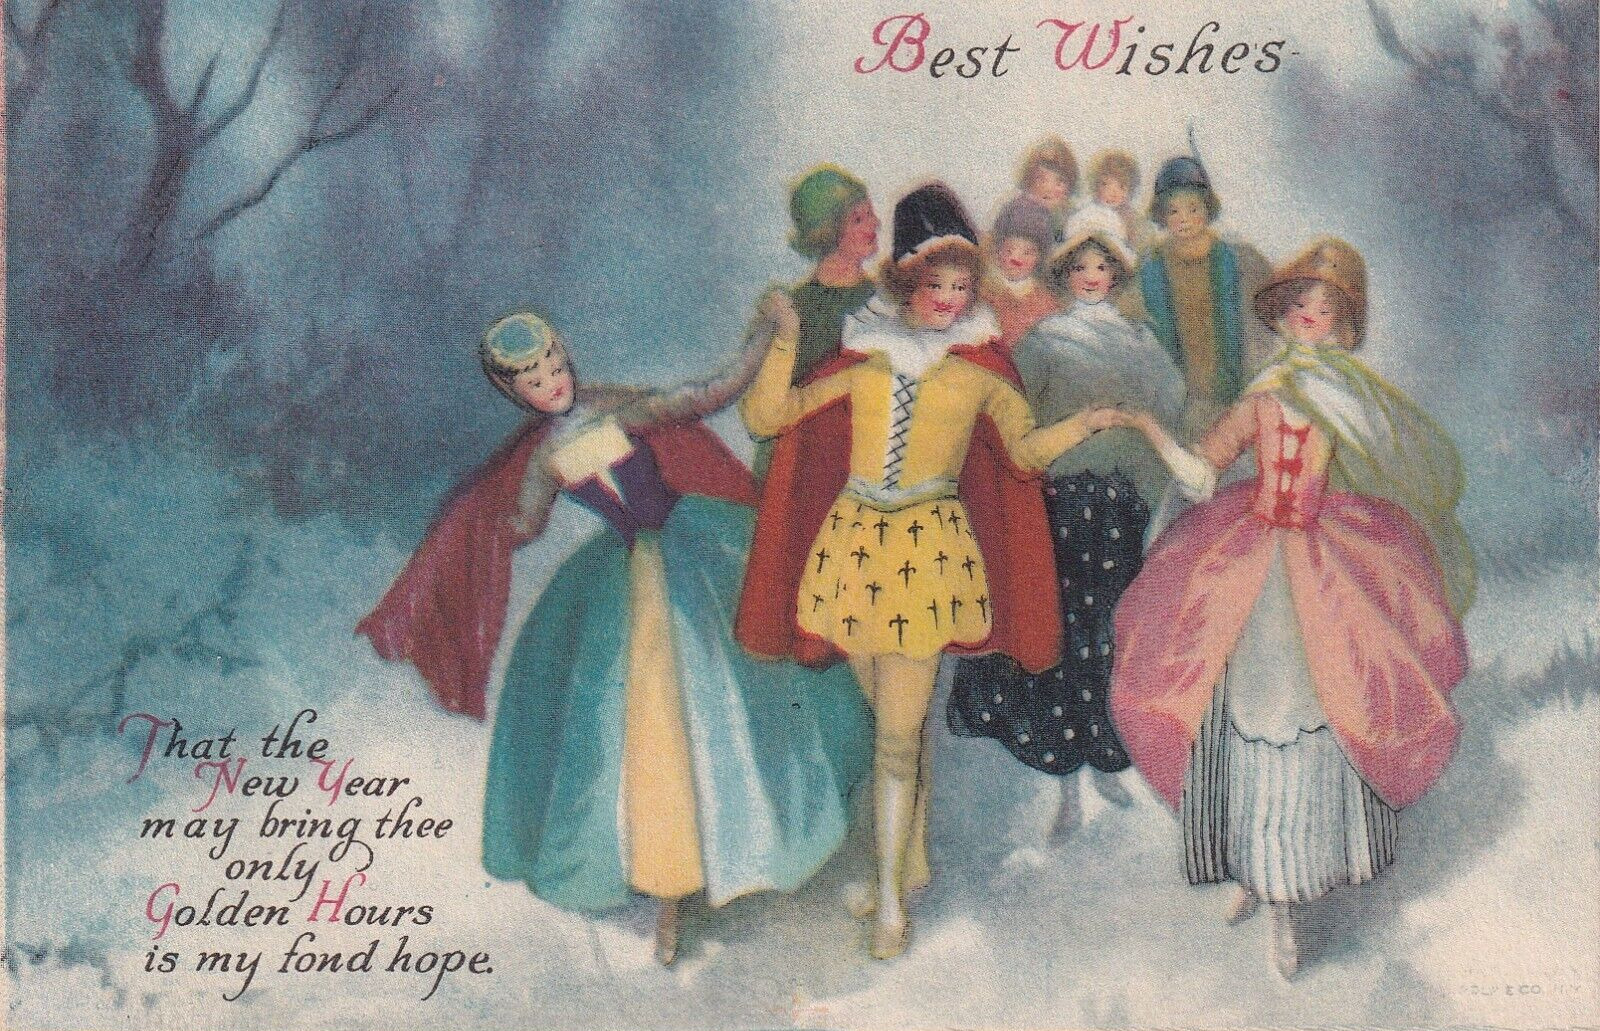 Vintage Best Wishes Happy New Year Fond Hope Early 1900's Postcard Celebration